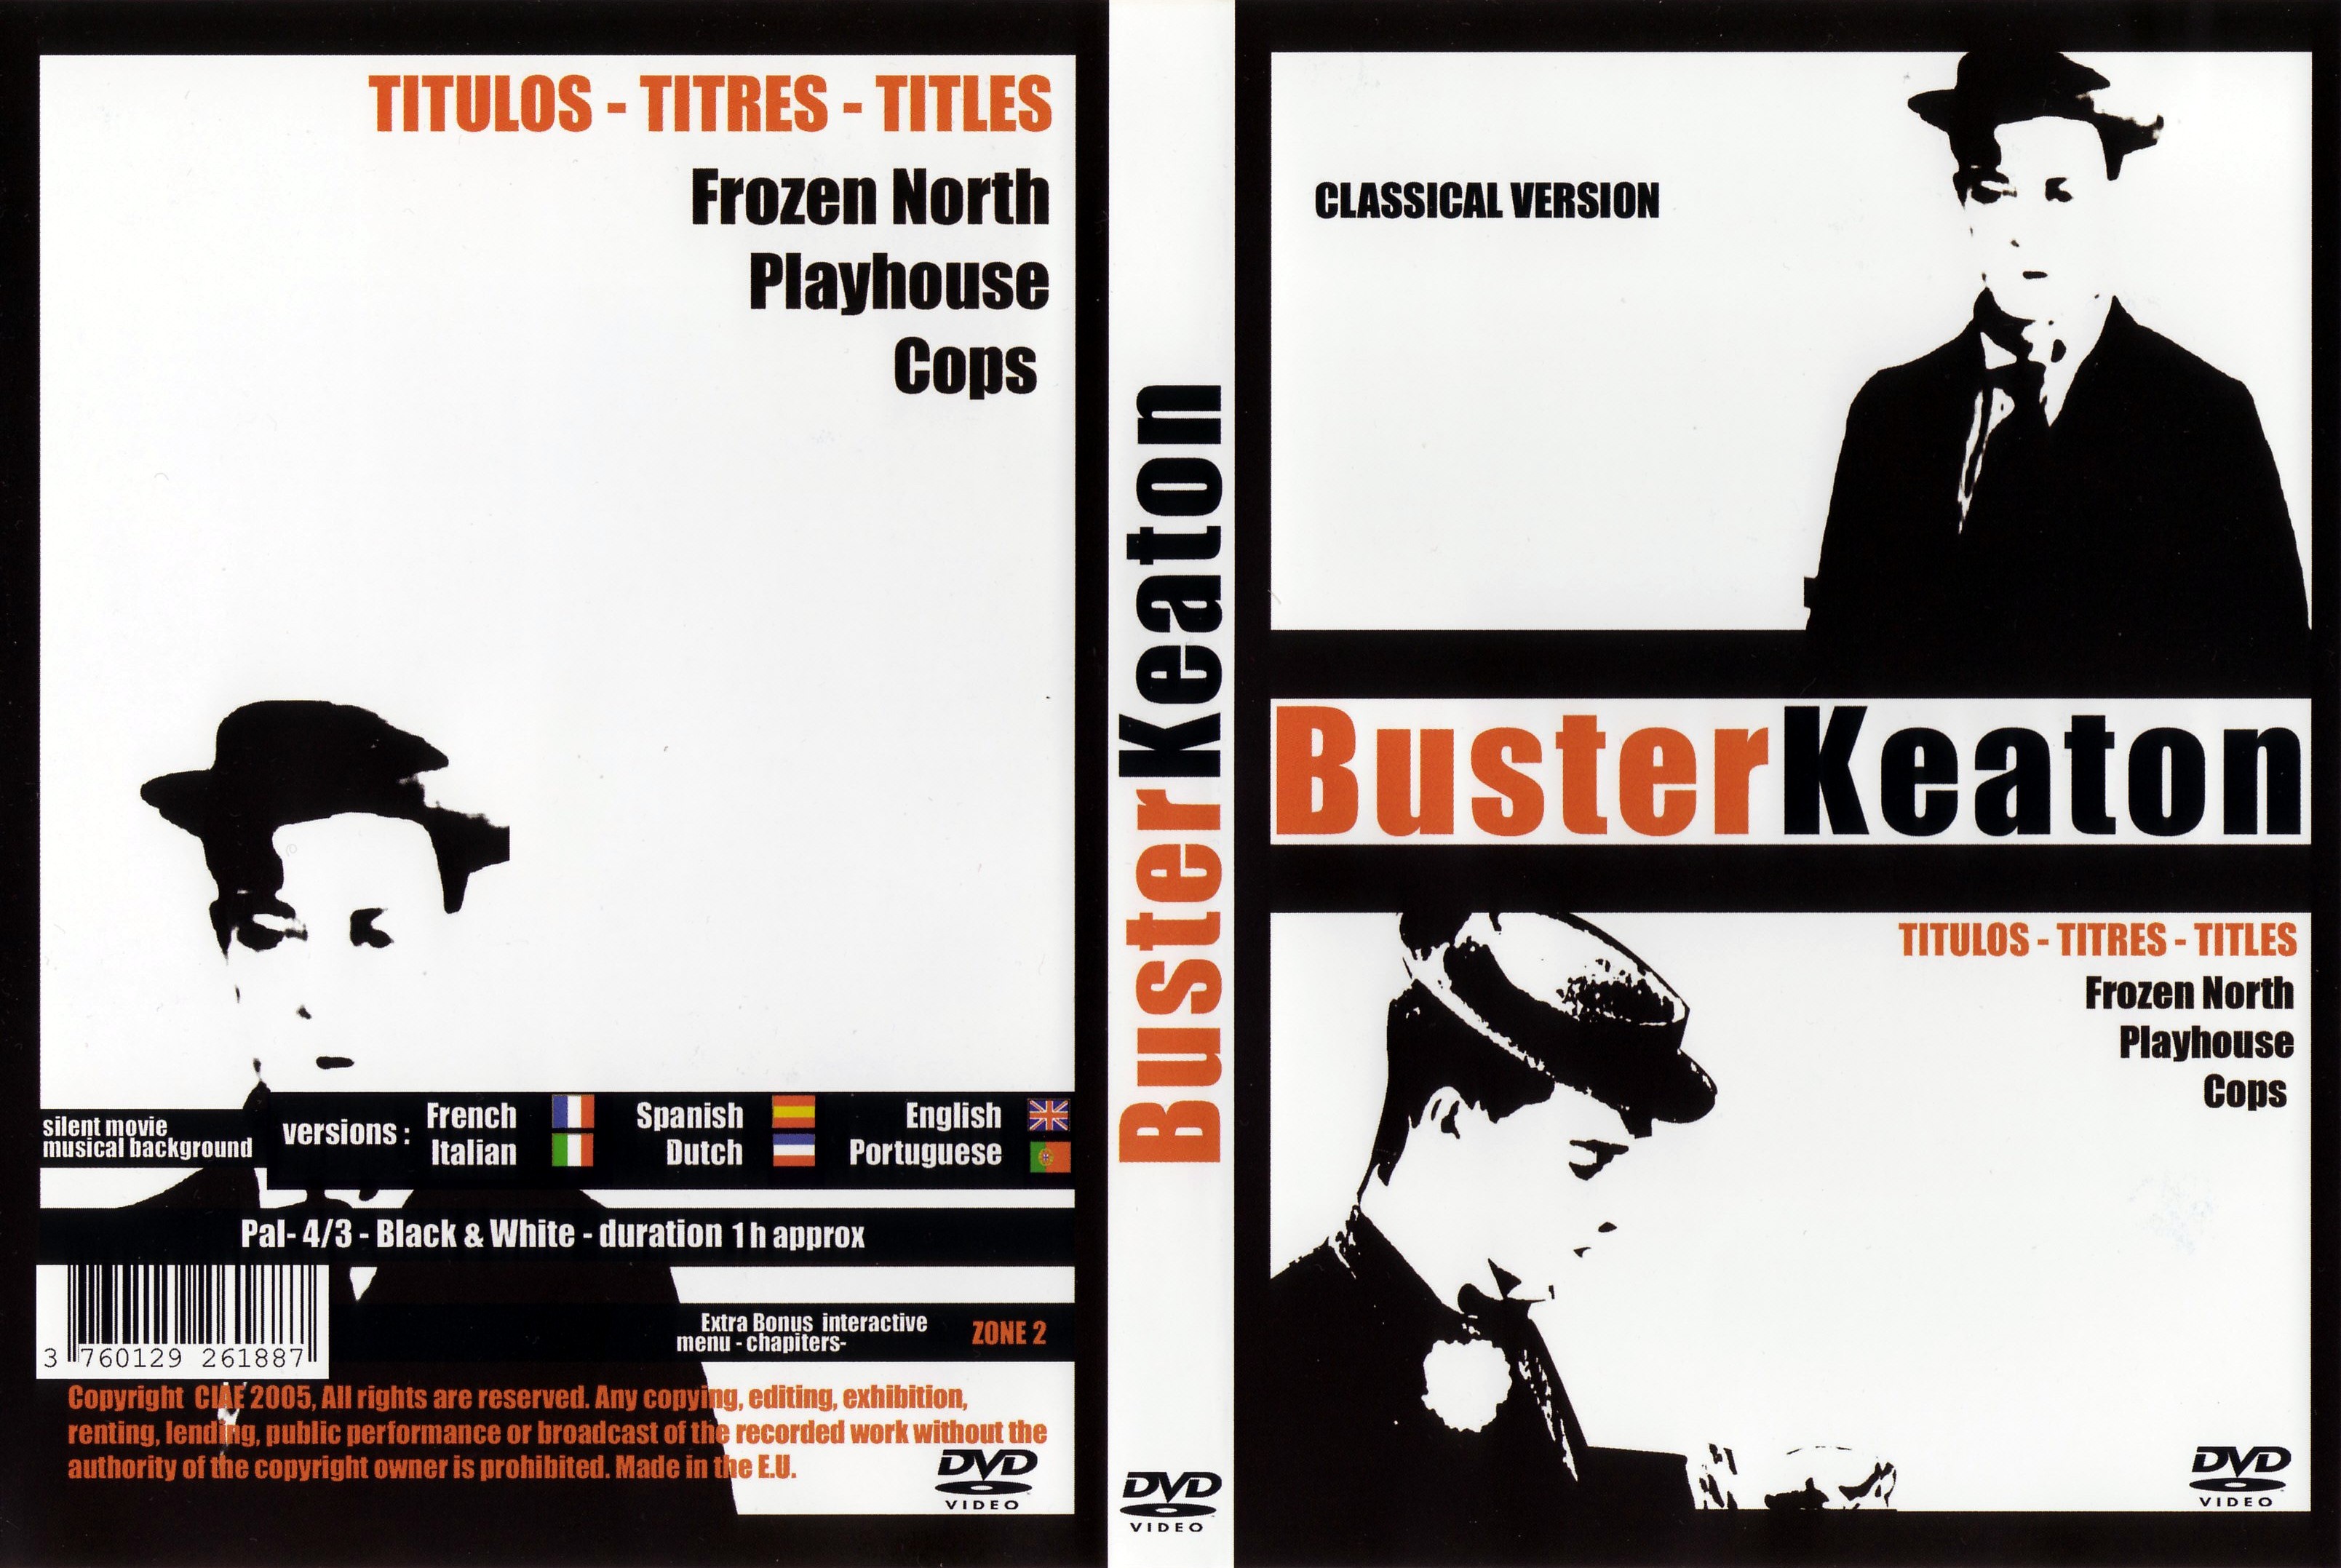 Jaquette DVD Buster Keaton - Frozen north playhouse cops